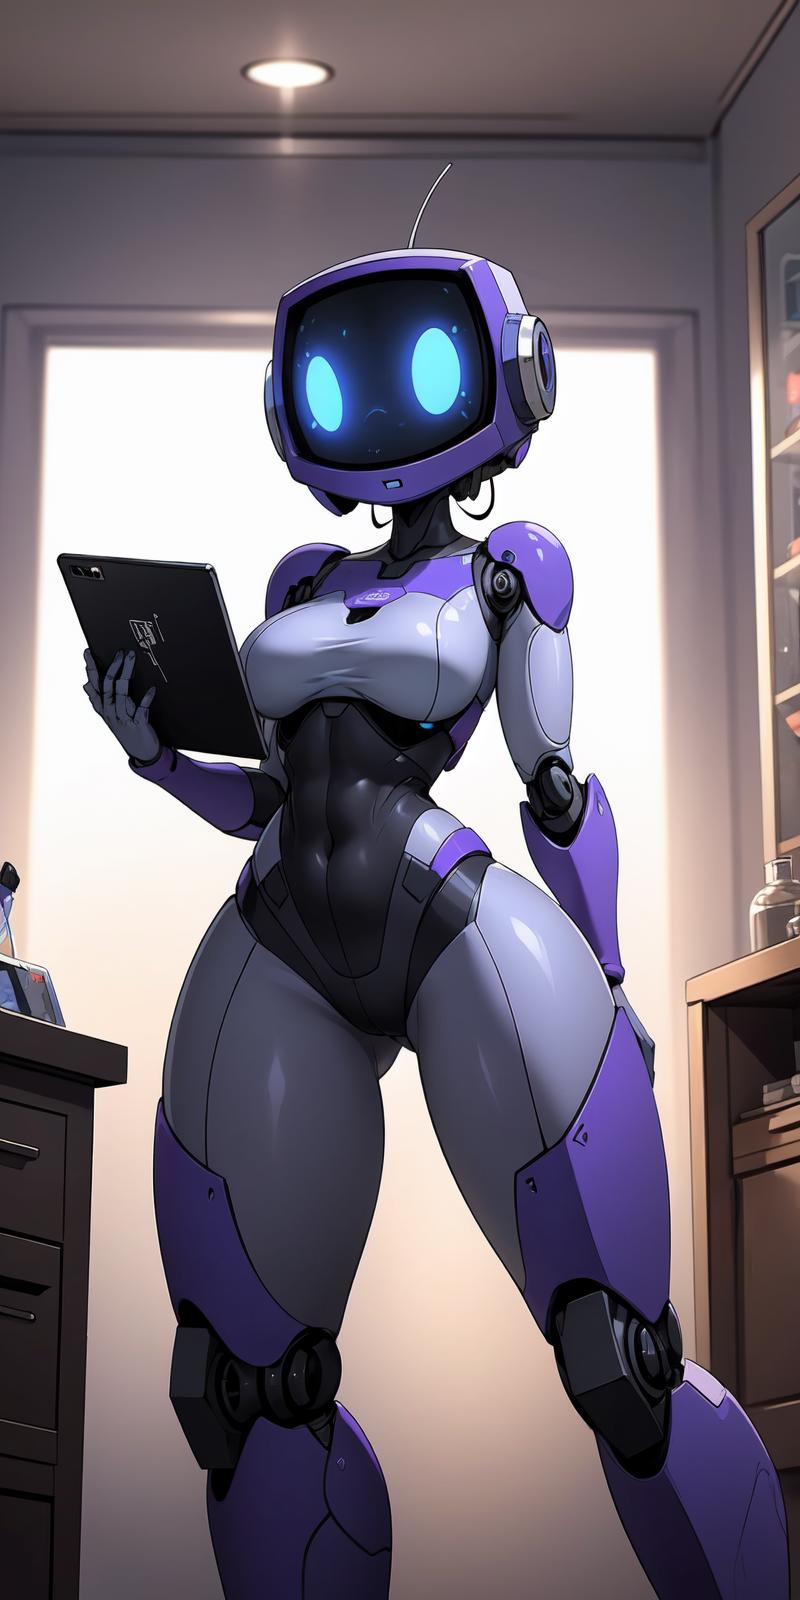 Thicc Robot Lady image by Lan2024